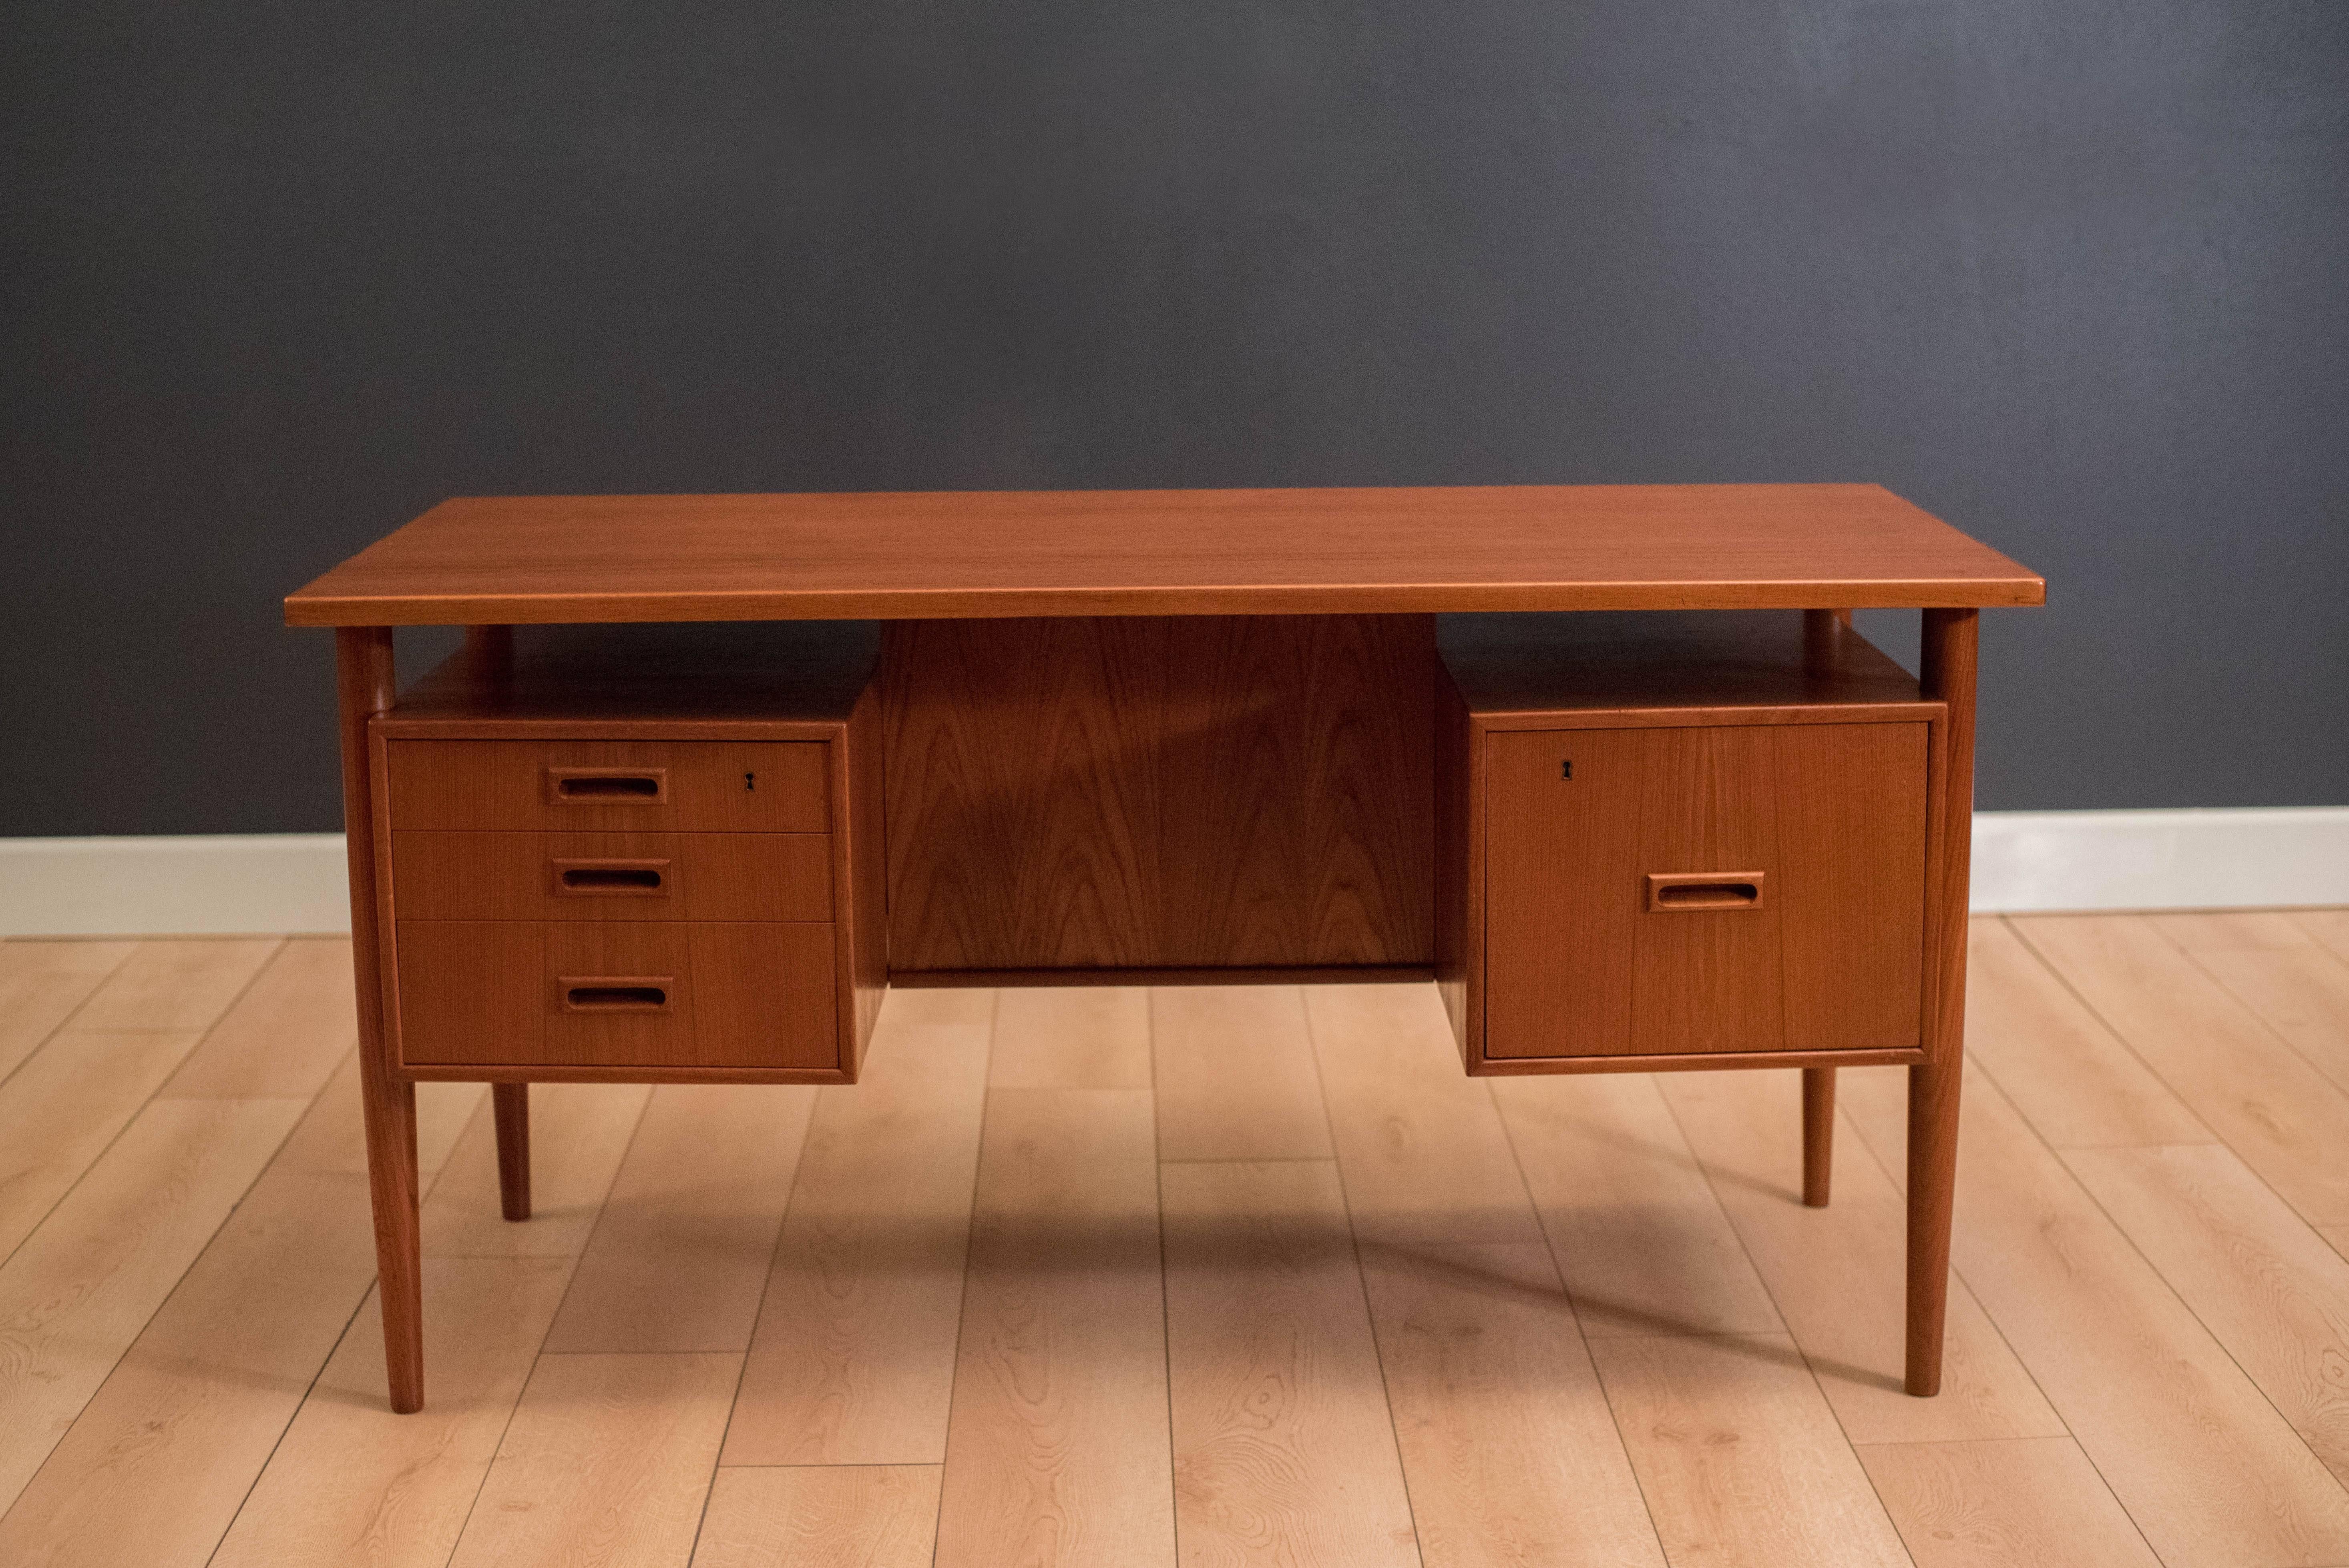 Mid-Century Modern desk in teak, circa 1960s. This piece features a floating desk top with external legs. Includes three small dovetailed drawers and one filing cabinet. Finished on the back with an open bookshelf which allows the desk to be